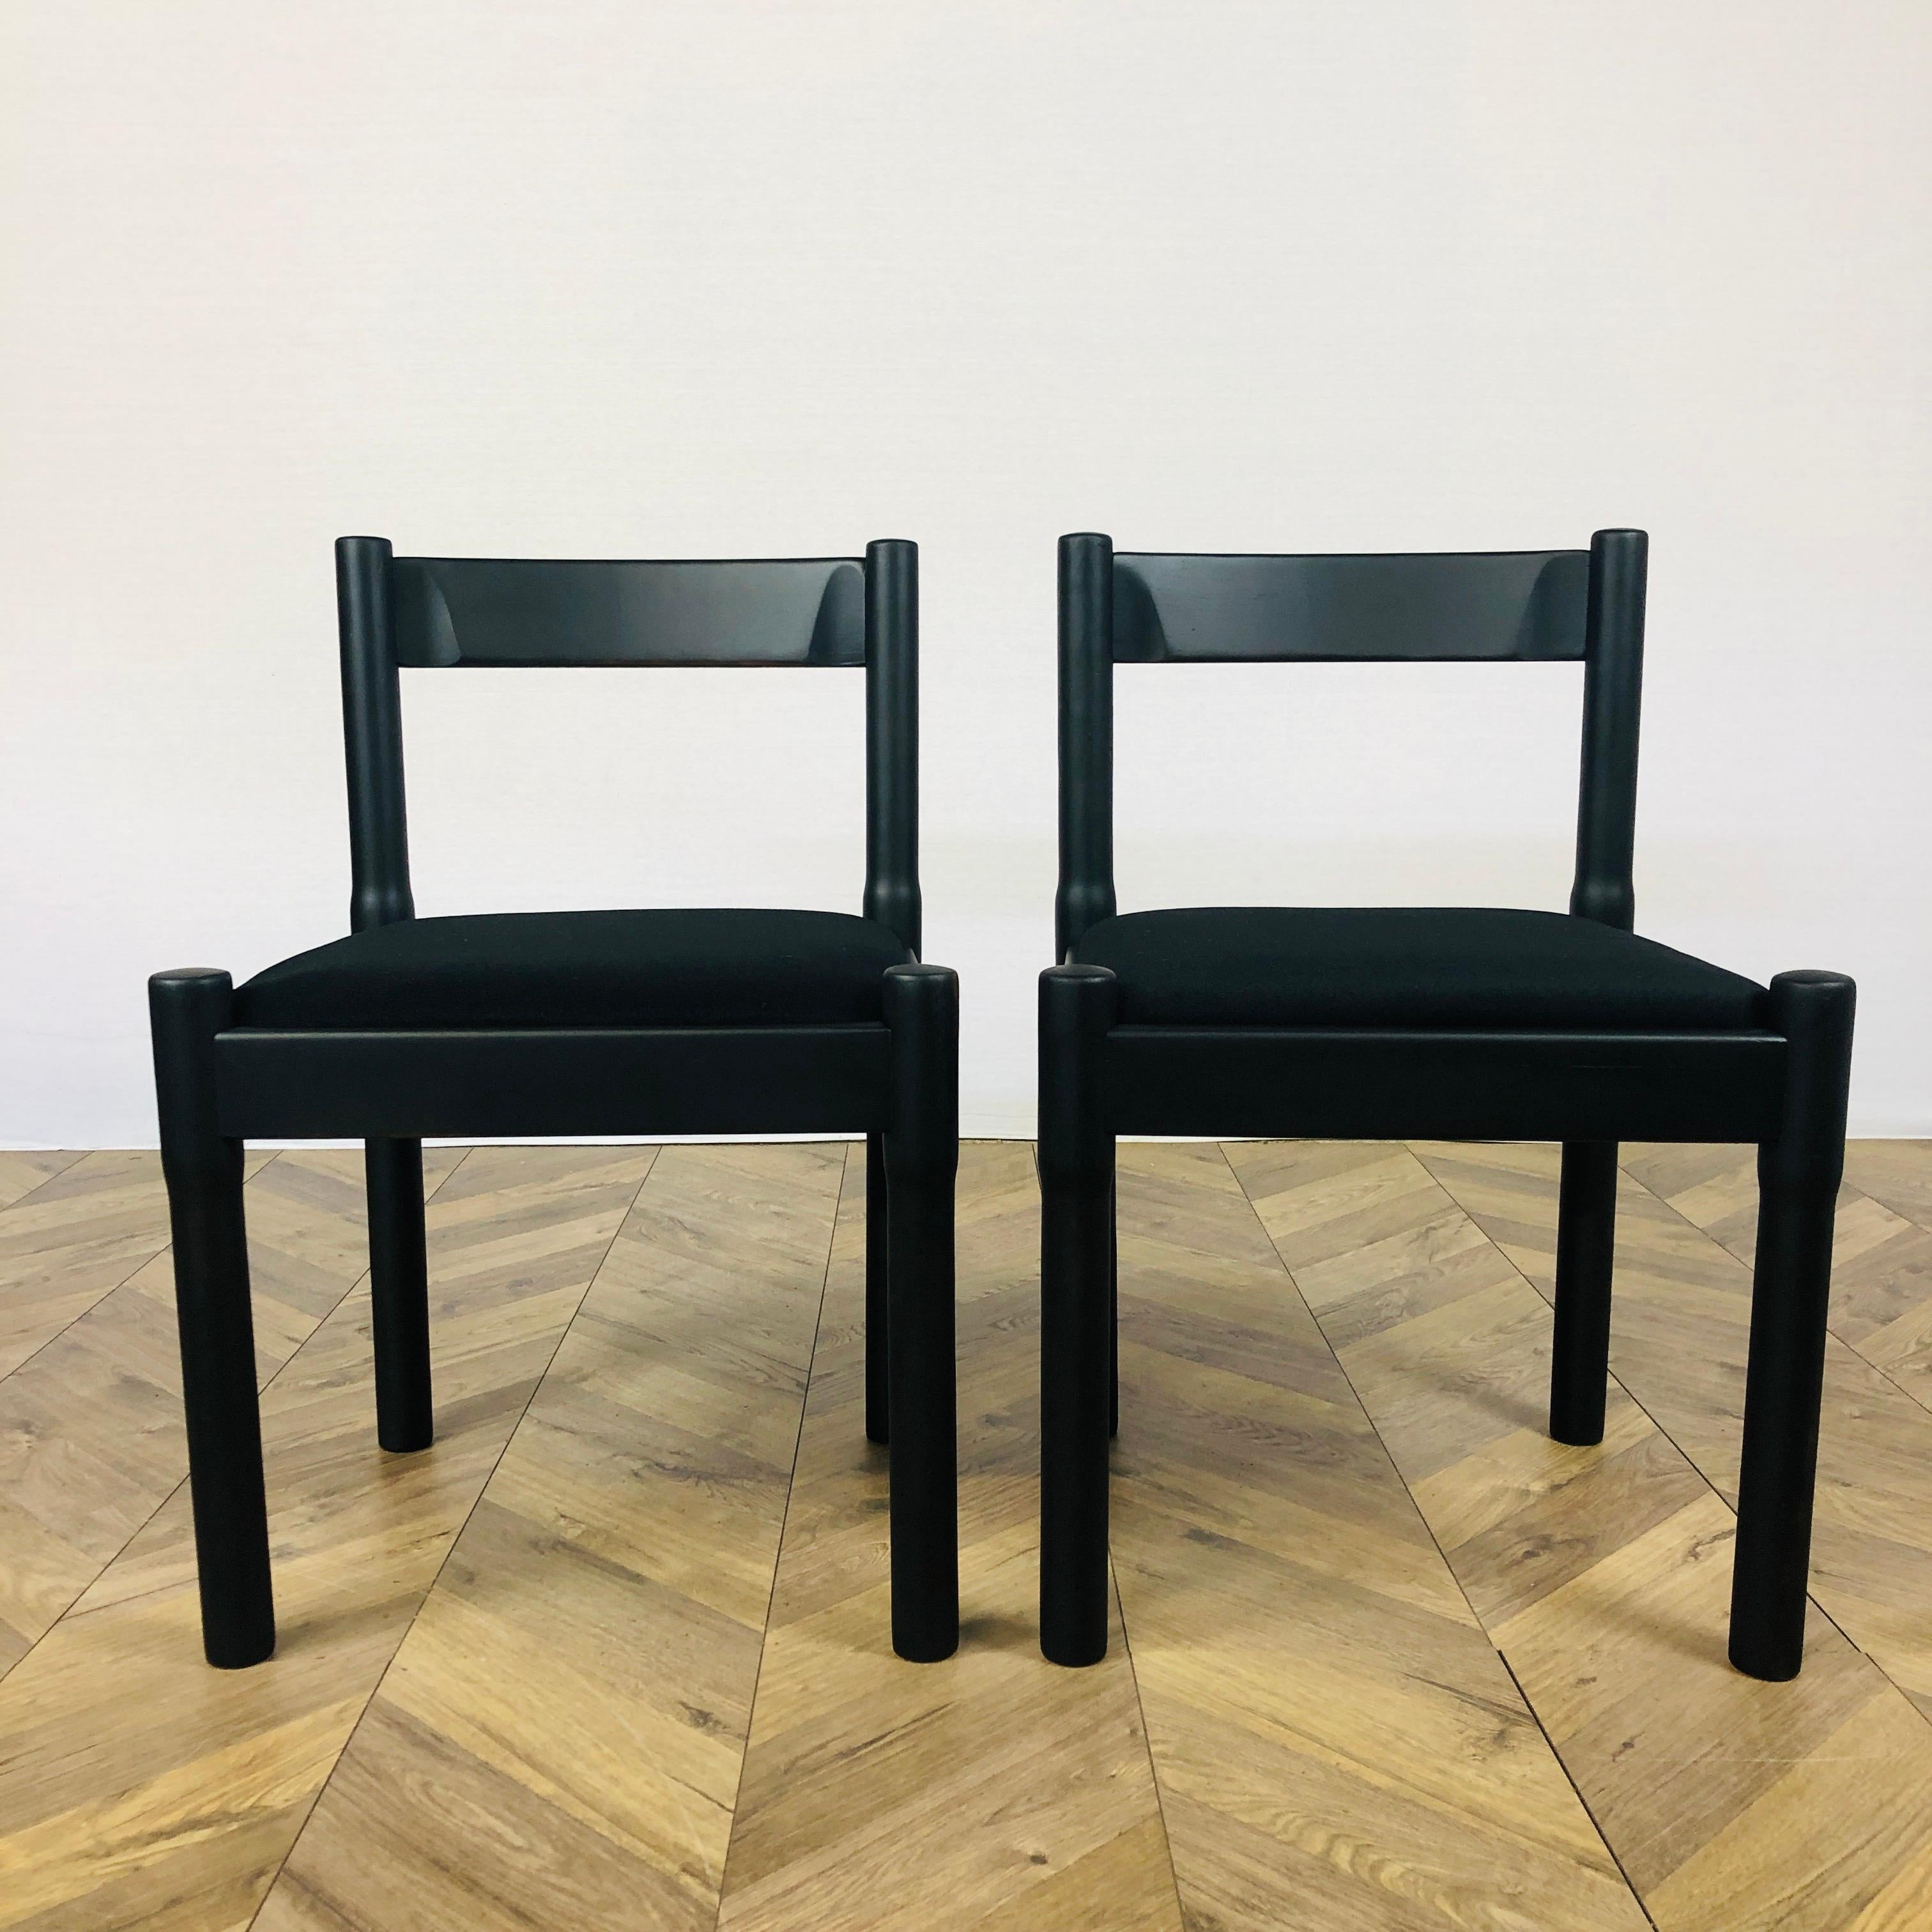 Italian Carimate Chairs by Vico Magistretti for Cassina, Set of 2, 1960s